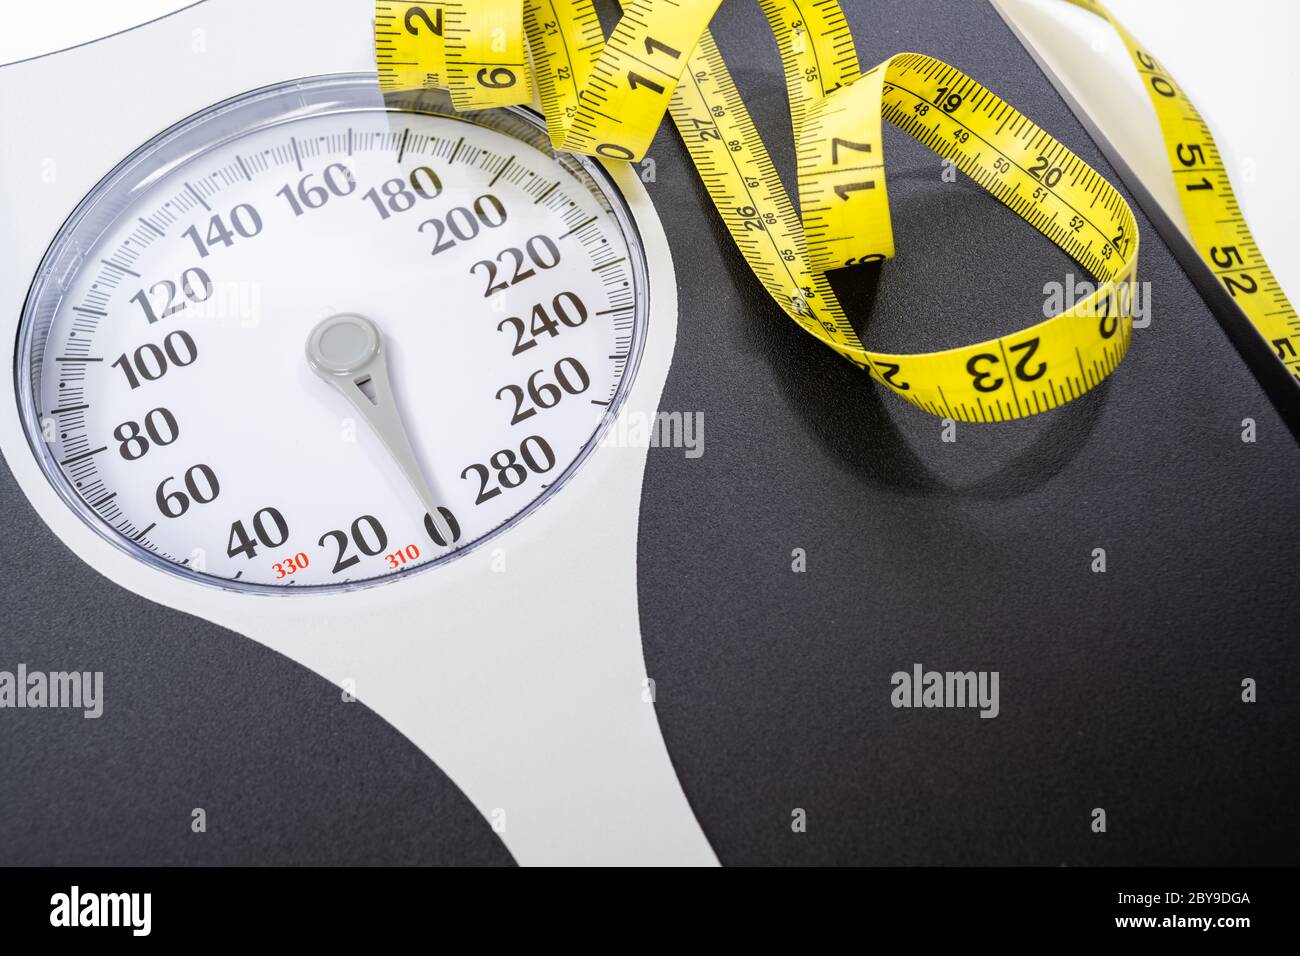 Human weight Dial measuring scale and measuring tape  Stock Photo